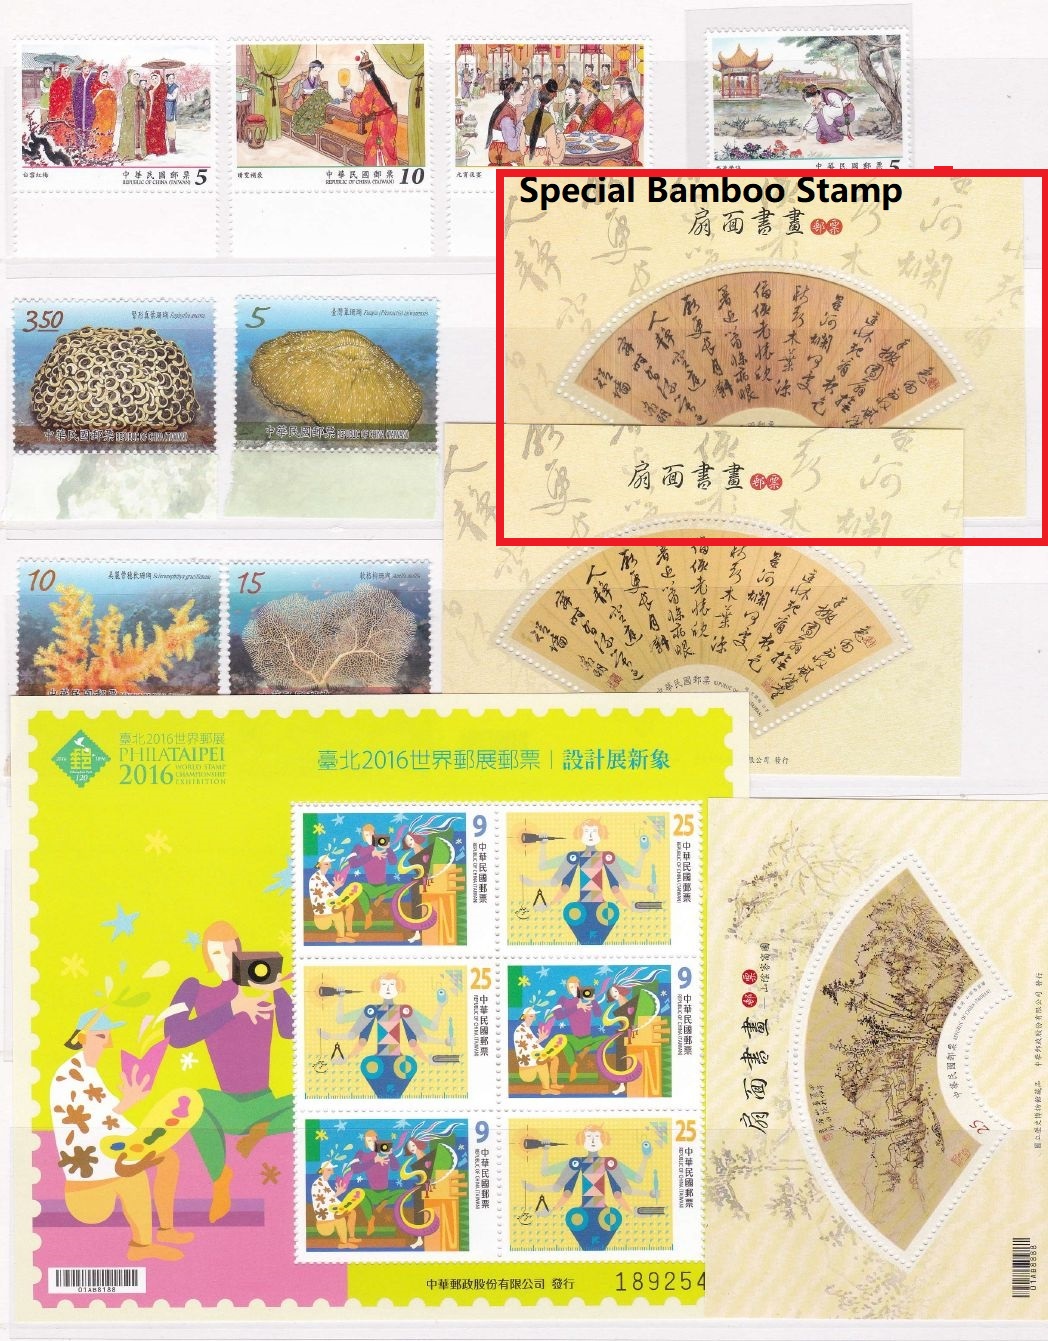 M8303, Taiwan (R.O.China) 2016 Full Year Stamps and MS, with Bamboo Stamp